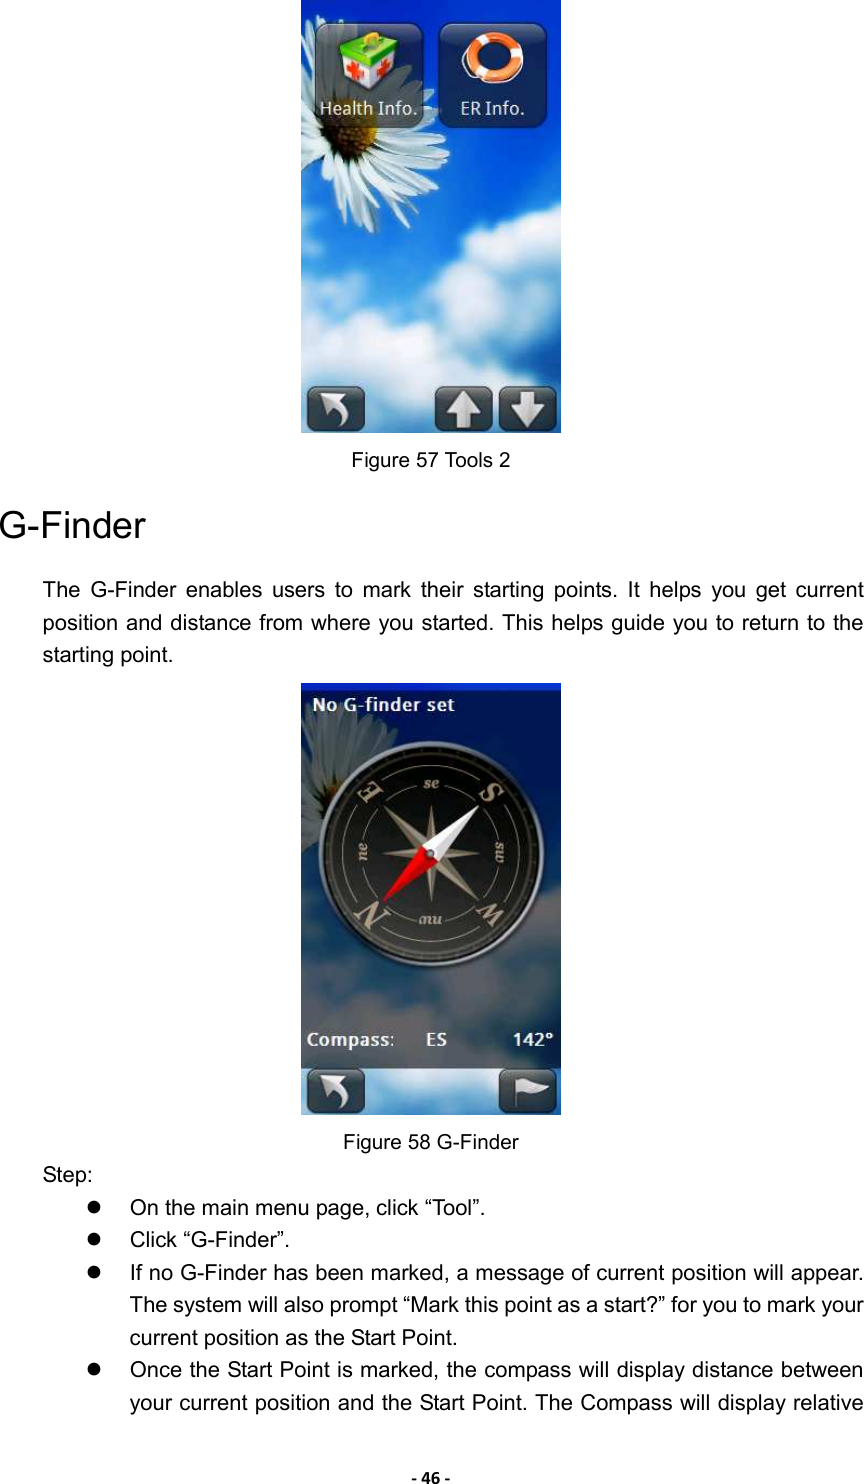 - 46 -  Figure 57 Tools 2 G-Finder The  G-Finder  enables  users  to  mark  their  starting  points.  It  helps  you  get  current position and distance from where you started. This helps guide you to return to the starting point.    Figure 58 G-Finder   Step:   On the main menu page, click “Tool”.     Click “G-Finder”.     If no G-Finder has been marked, a message of current position will appear. The system will also prompt “Mark this point as a start?” for you to mark your current position as the Start Point.     Once the Start Point is marked, the compass will display distance between your current position and the Start Point. The Compass will display relative 